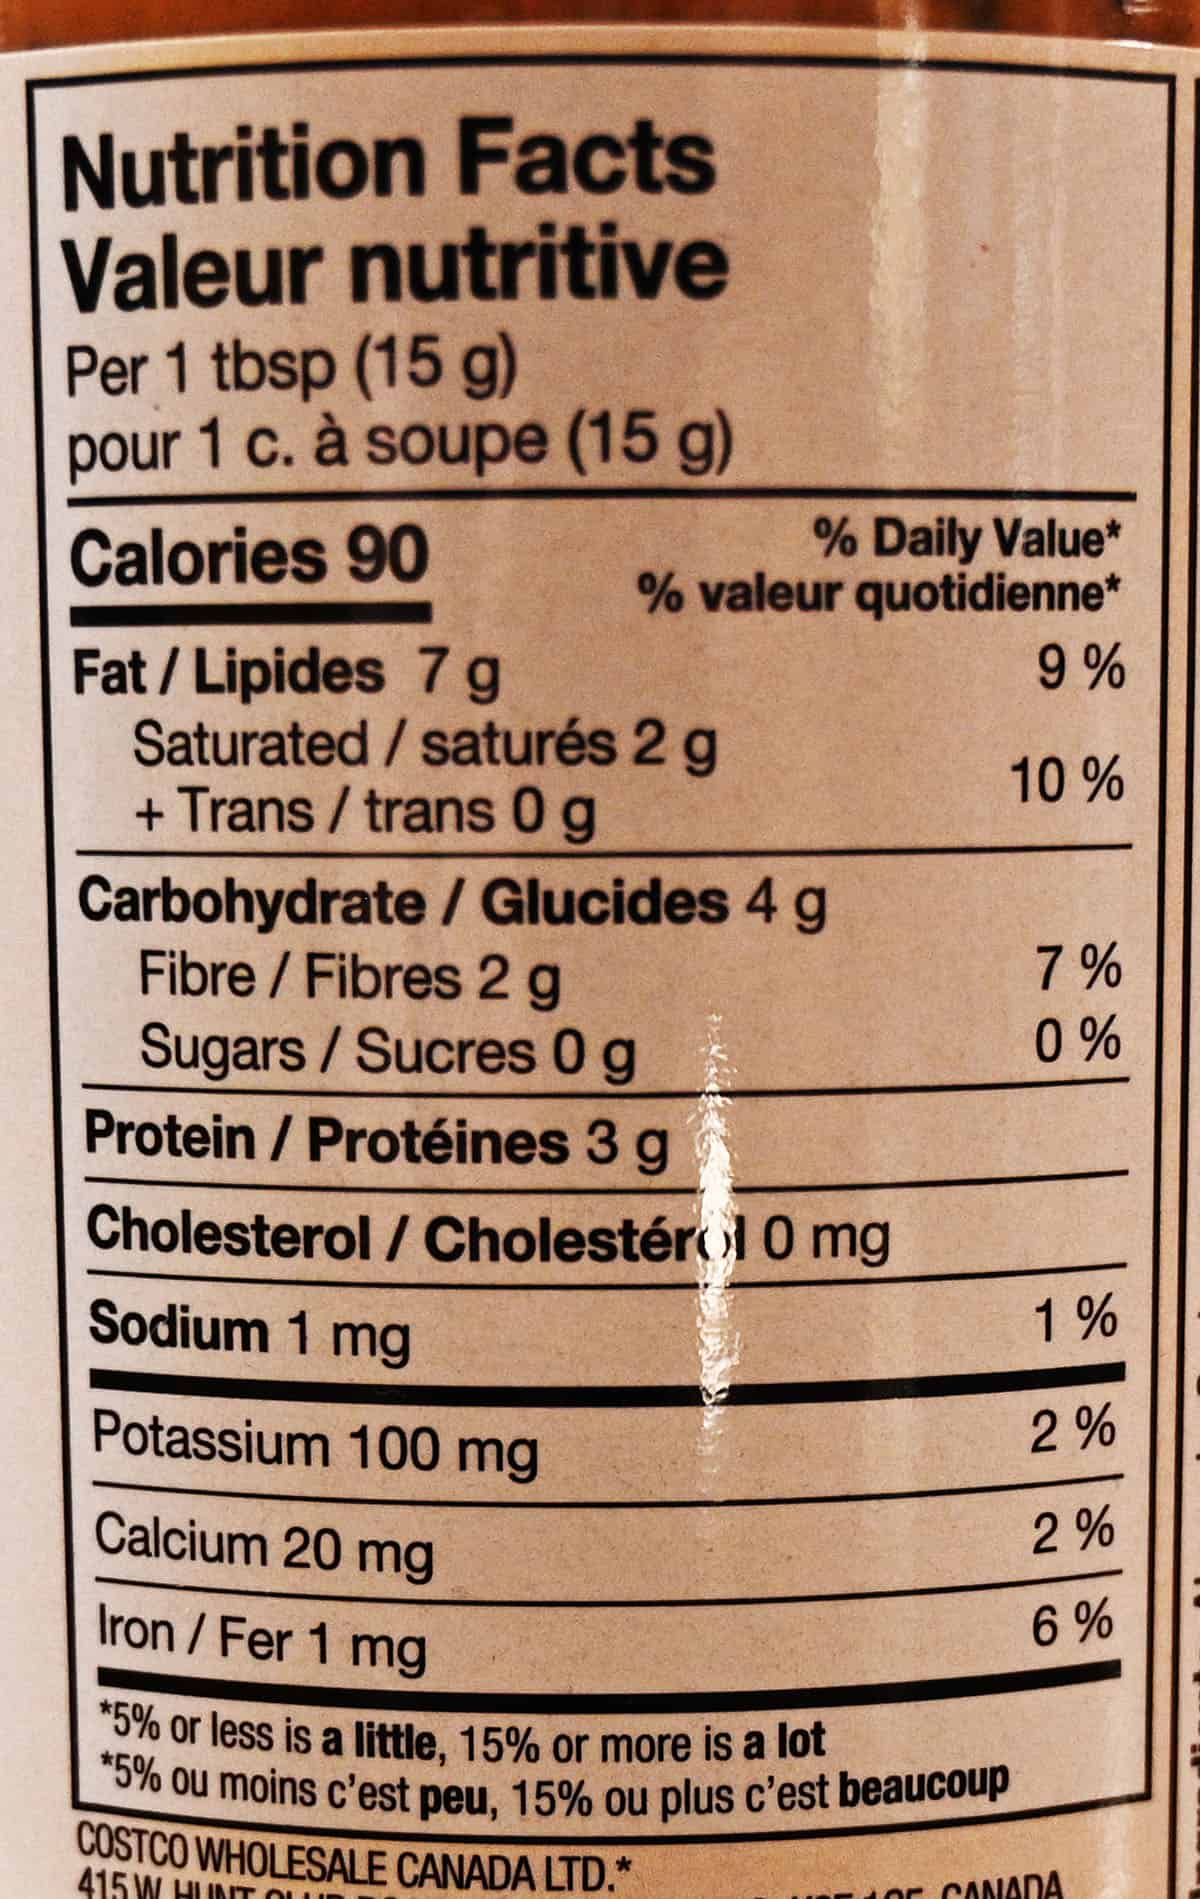 Nutrition facts from the container of nut butter.